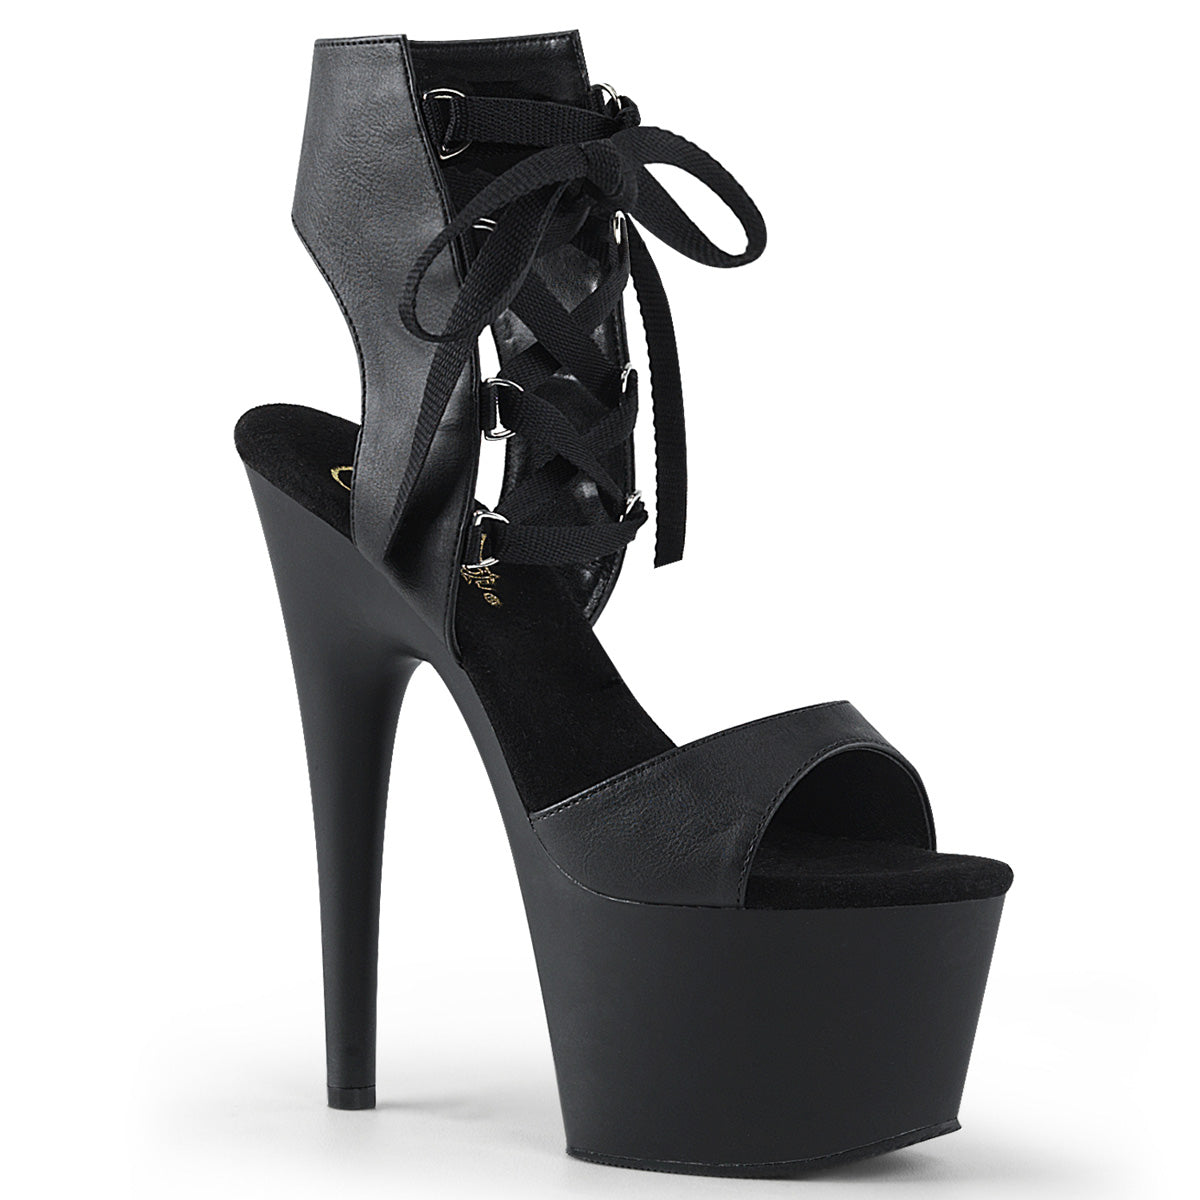 ADORE-700-14 Pleaser Sexy 7" Heel Black Pole Dance Sandals-Pleaser- Sexy Shoes